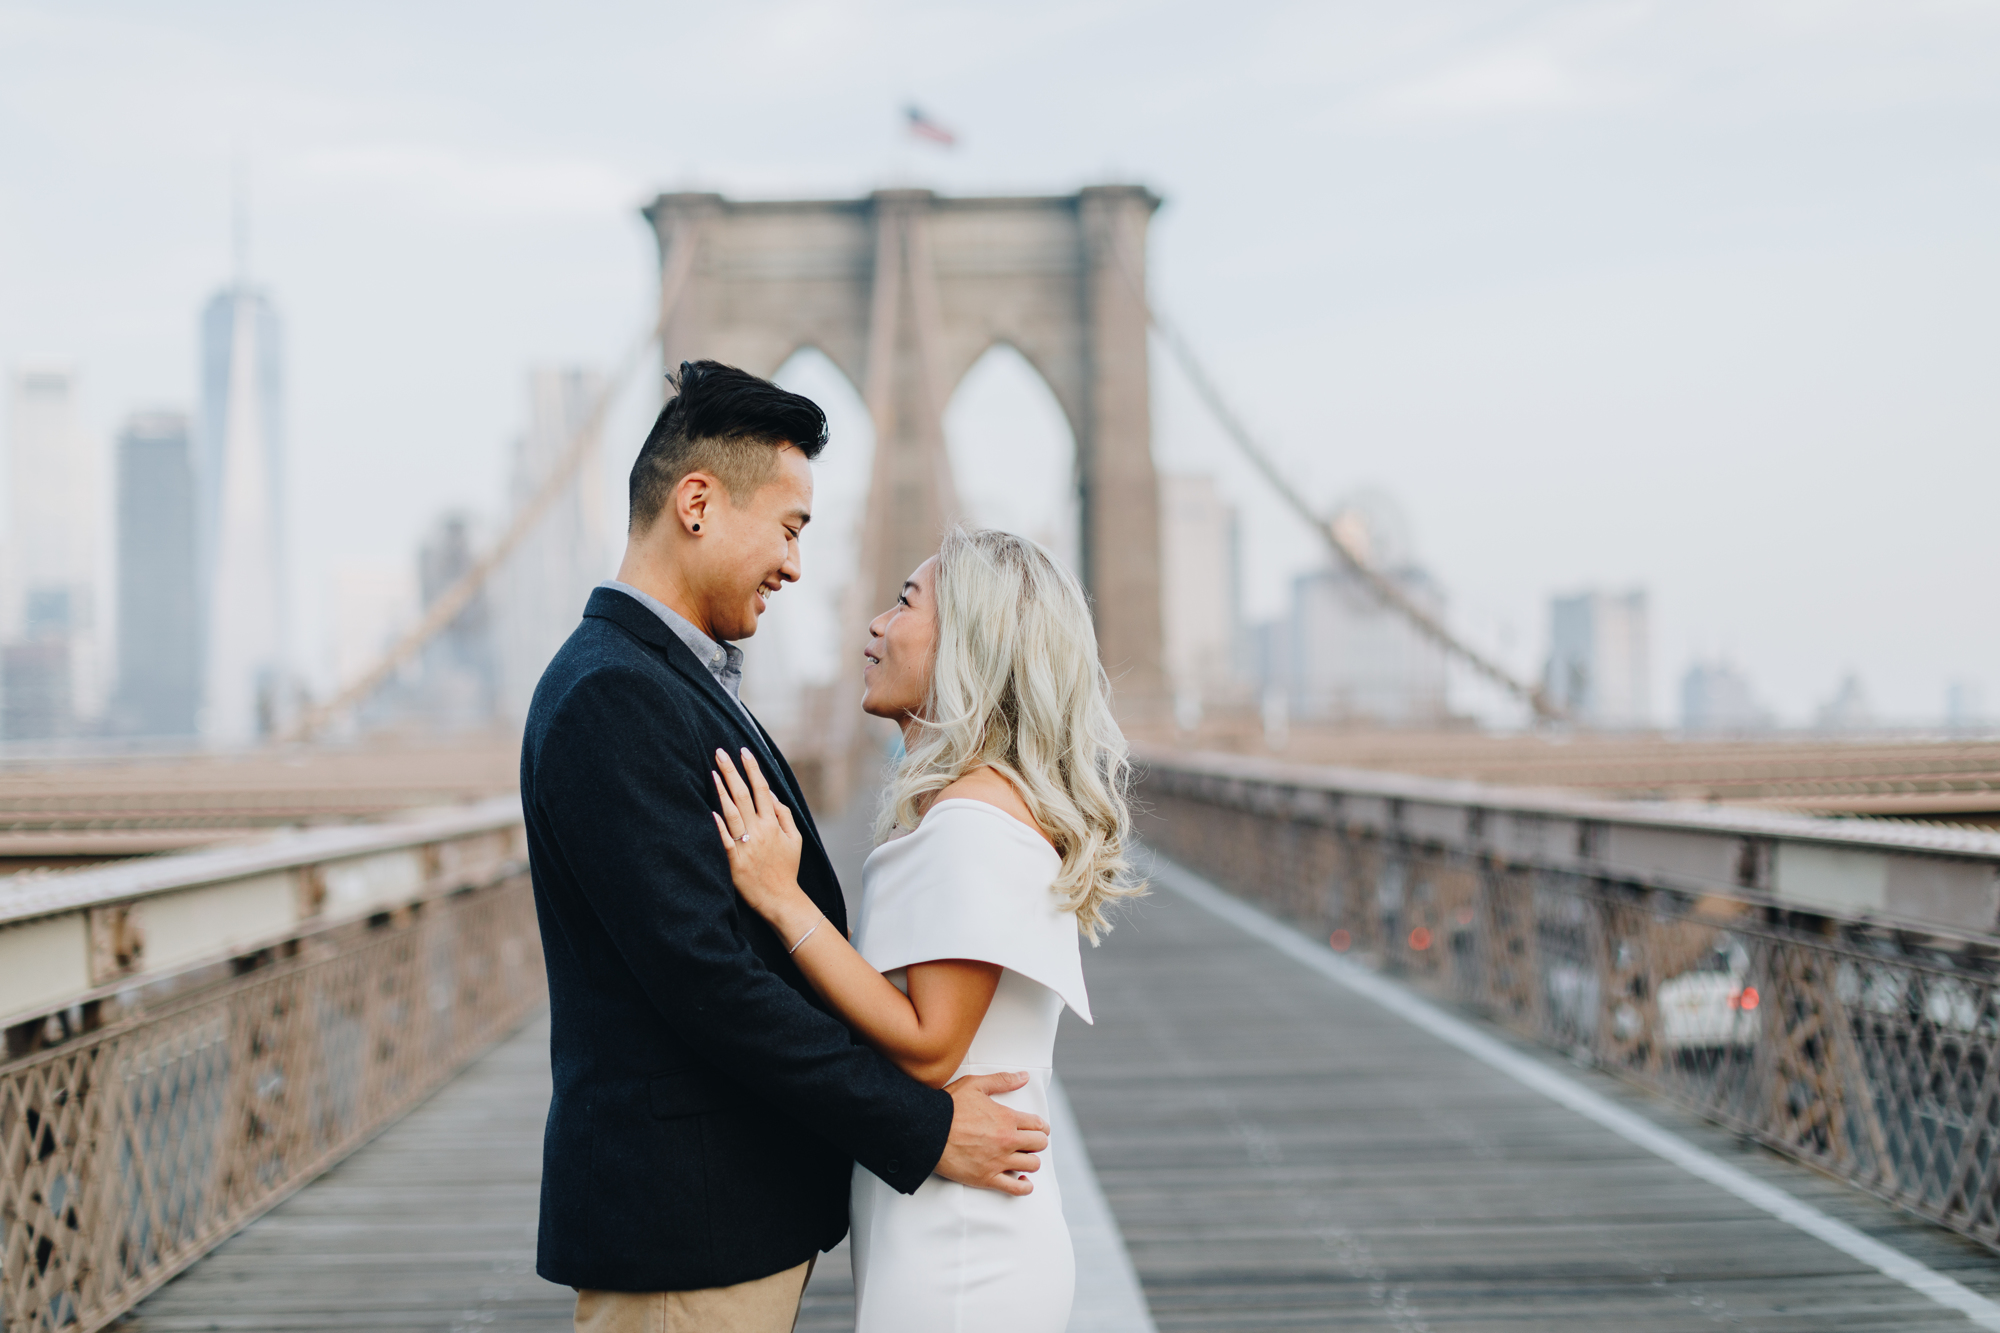 Picturesque Fall Engagement Photos in DUMBO